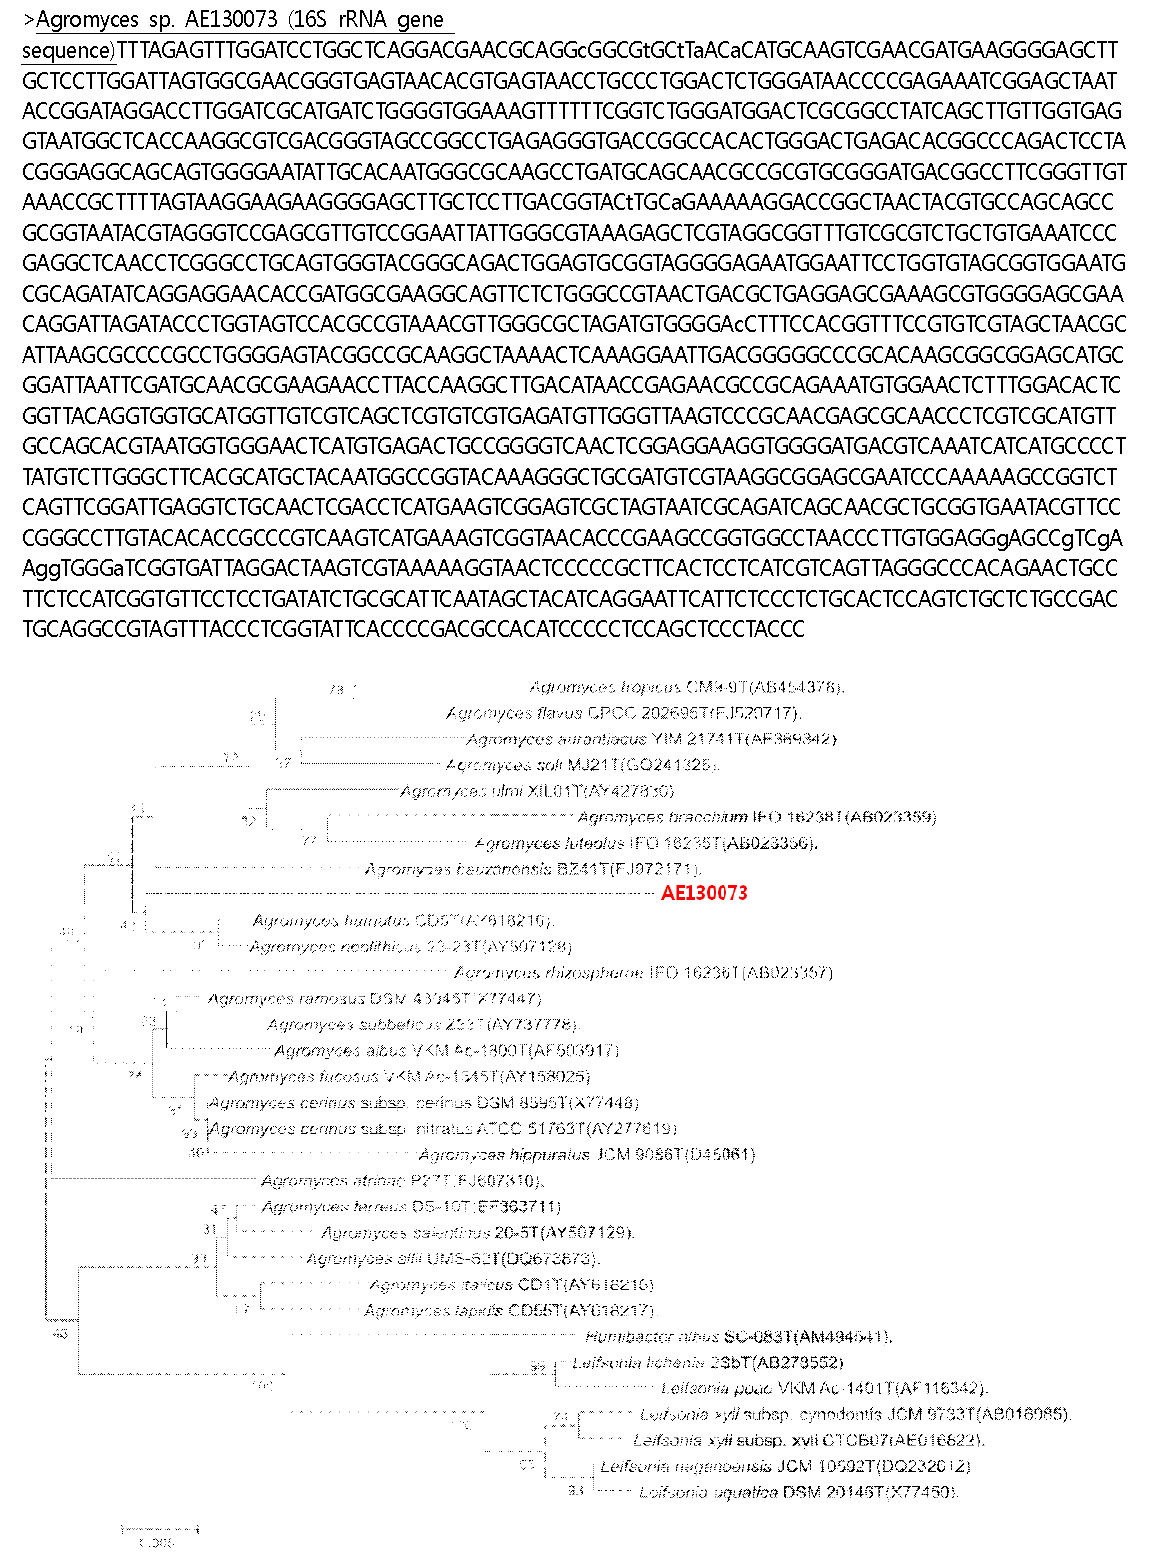 Phylogenetic tree constructed by neighbour-joining method showing the position of the strain AE130073